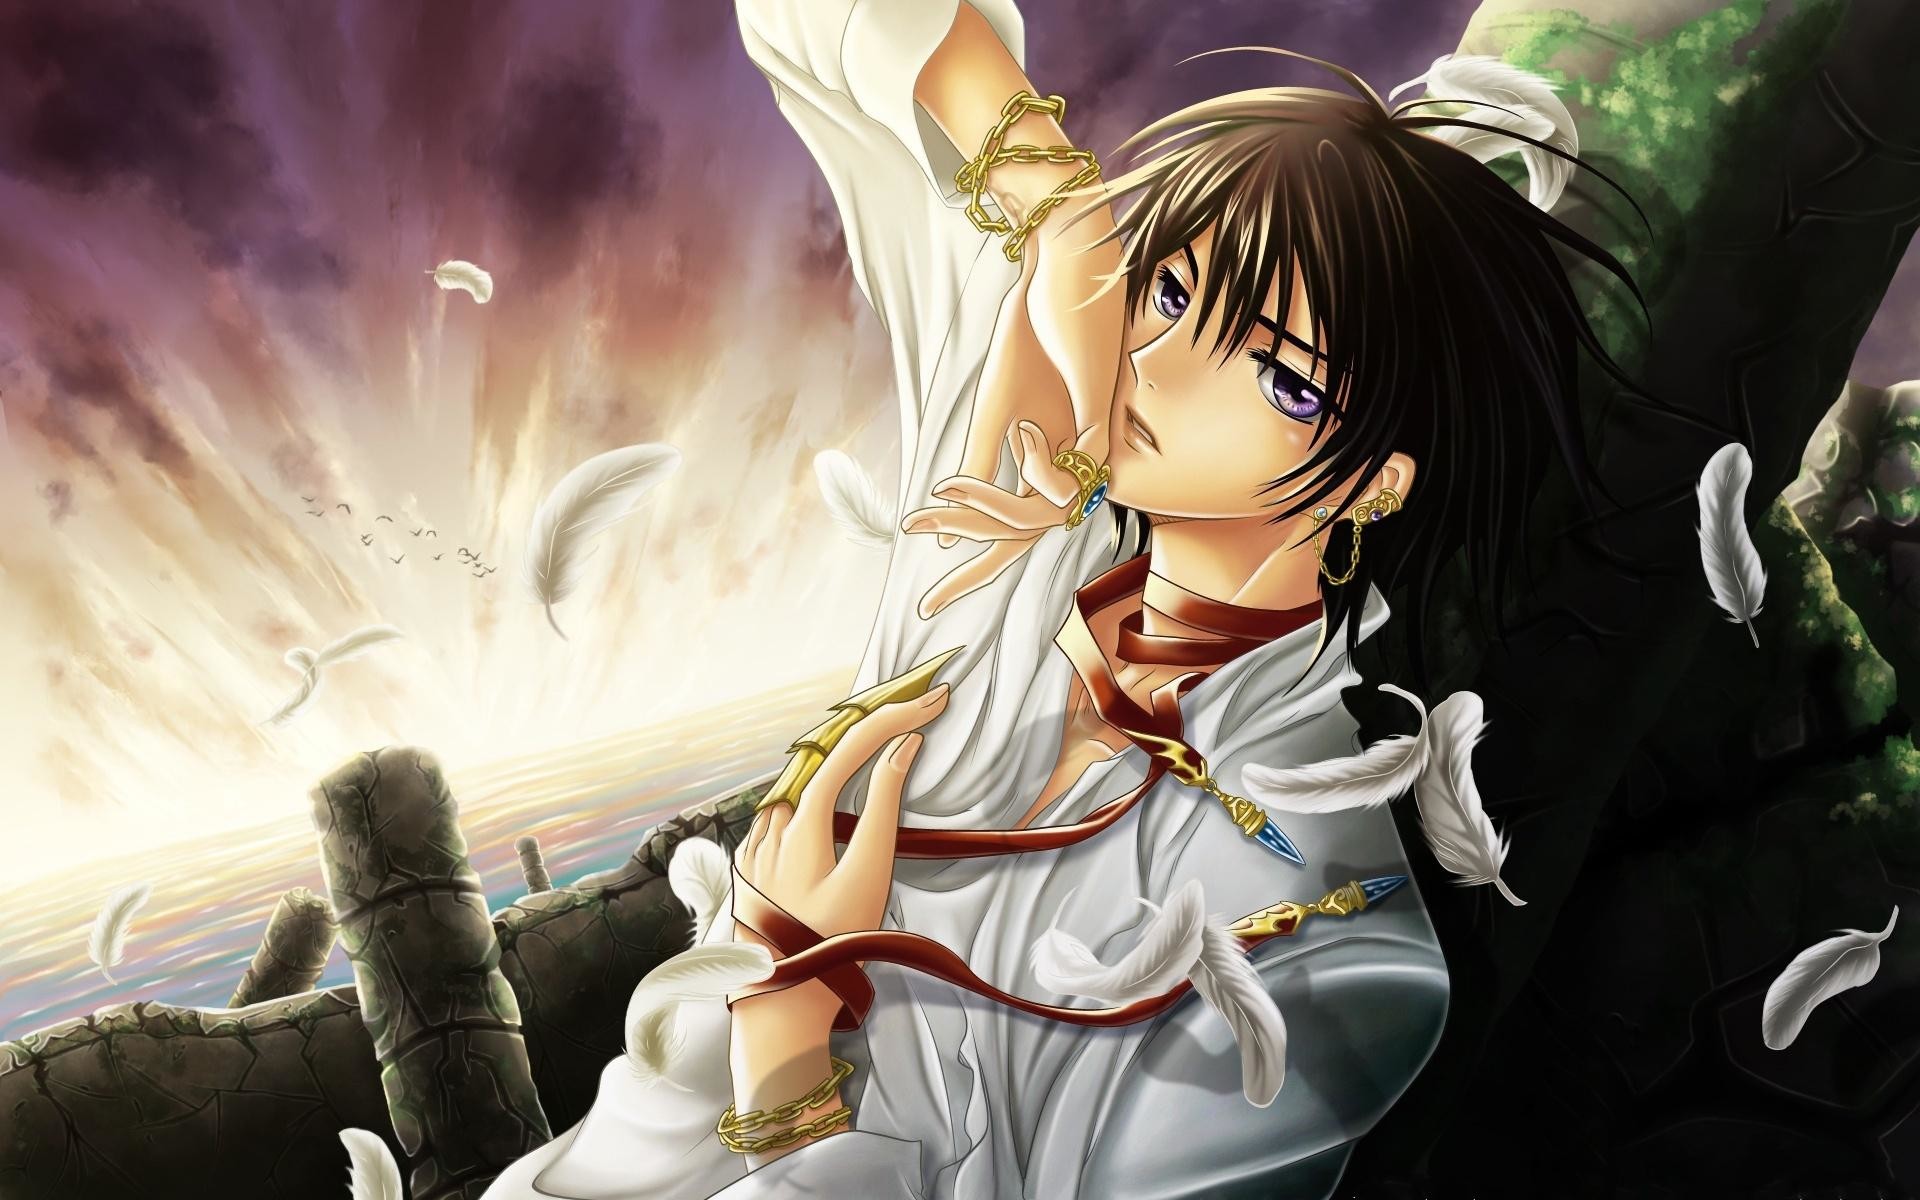 1920x1200 ... cool; anime boy waiting background one hd wallpaper pictures ...